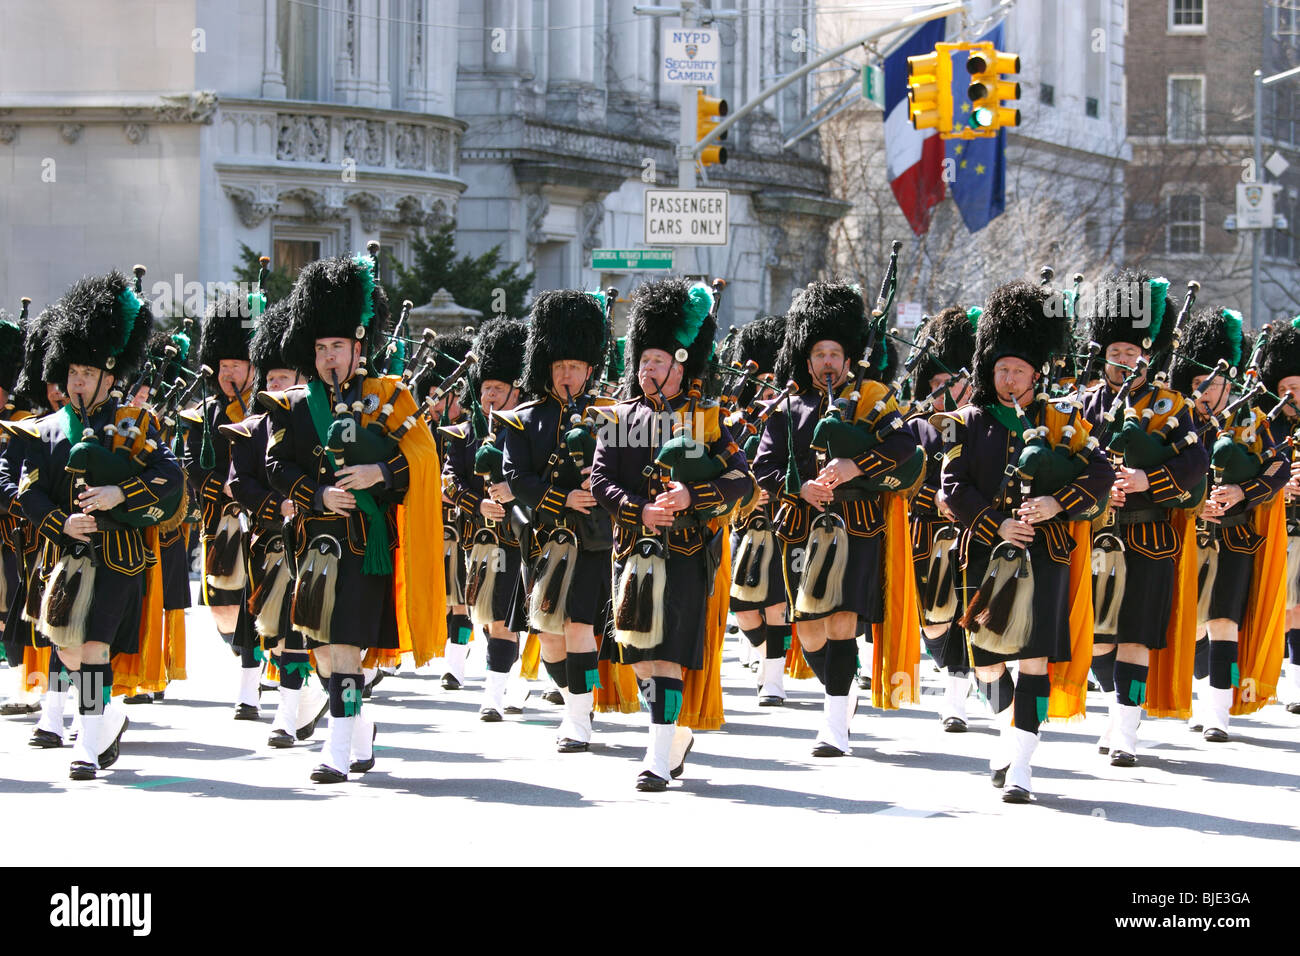 New York City Police Department Emerald Society Pipes and Drums marching  band on 5th Ave in Manhattan St. Patrick's Day parade Stock Photo - Alamy